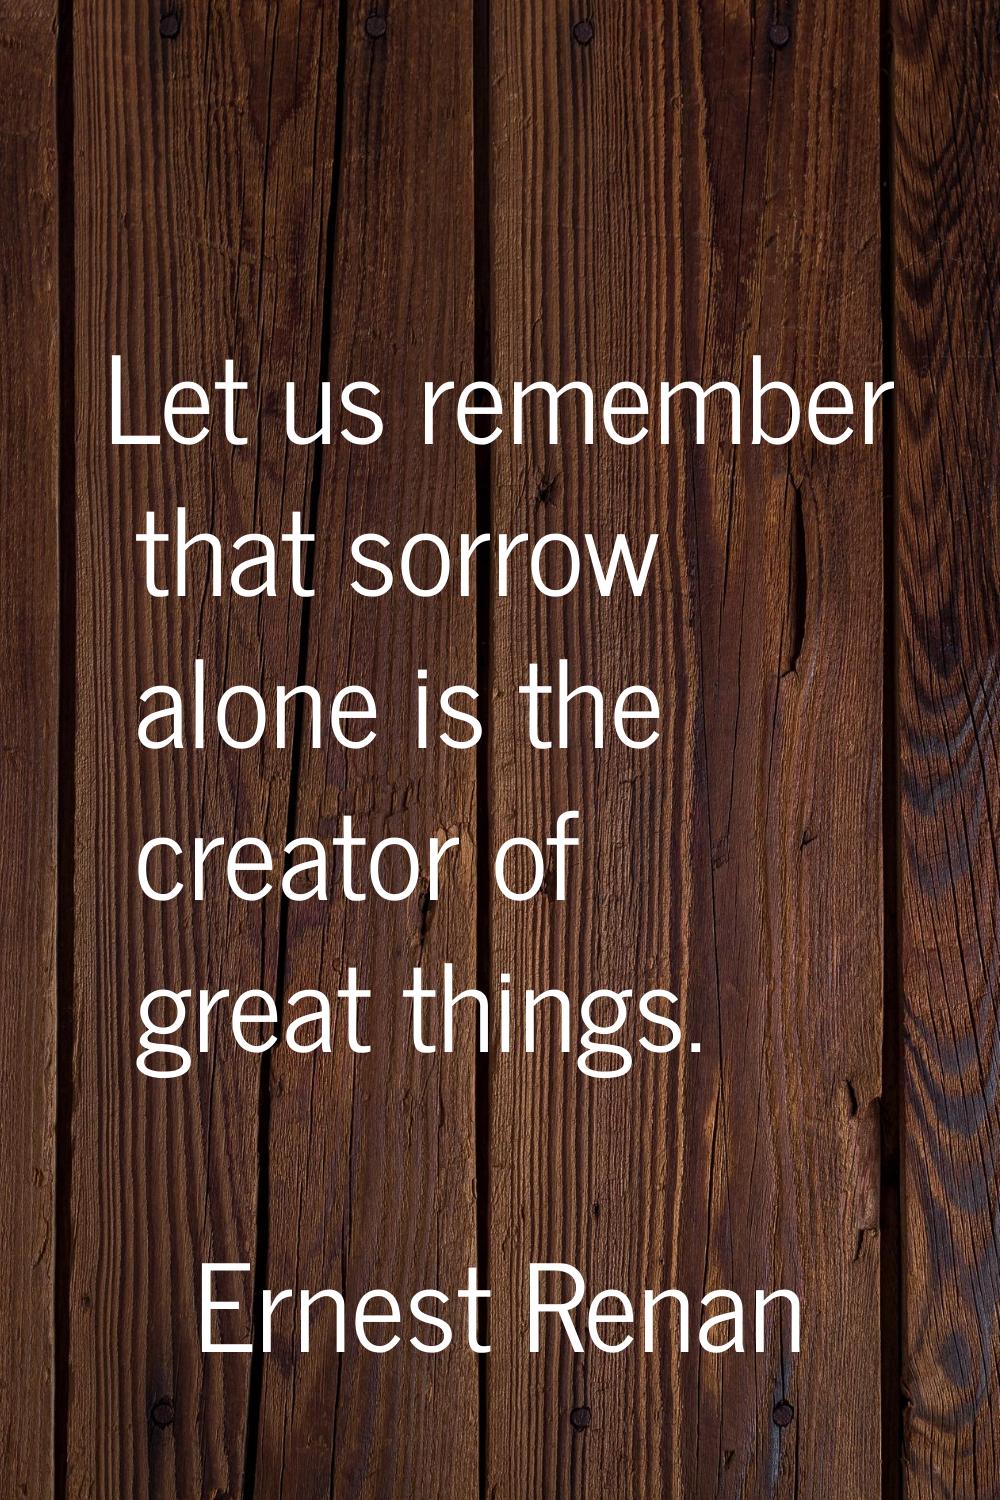 Let us remember that sorrow alone is the creator of great things.